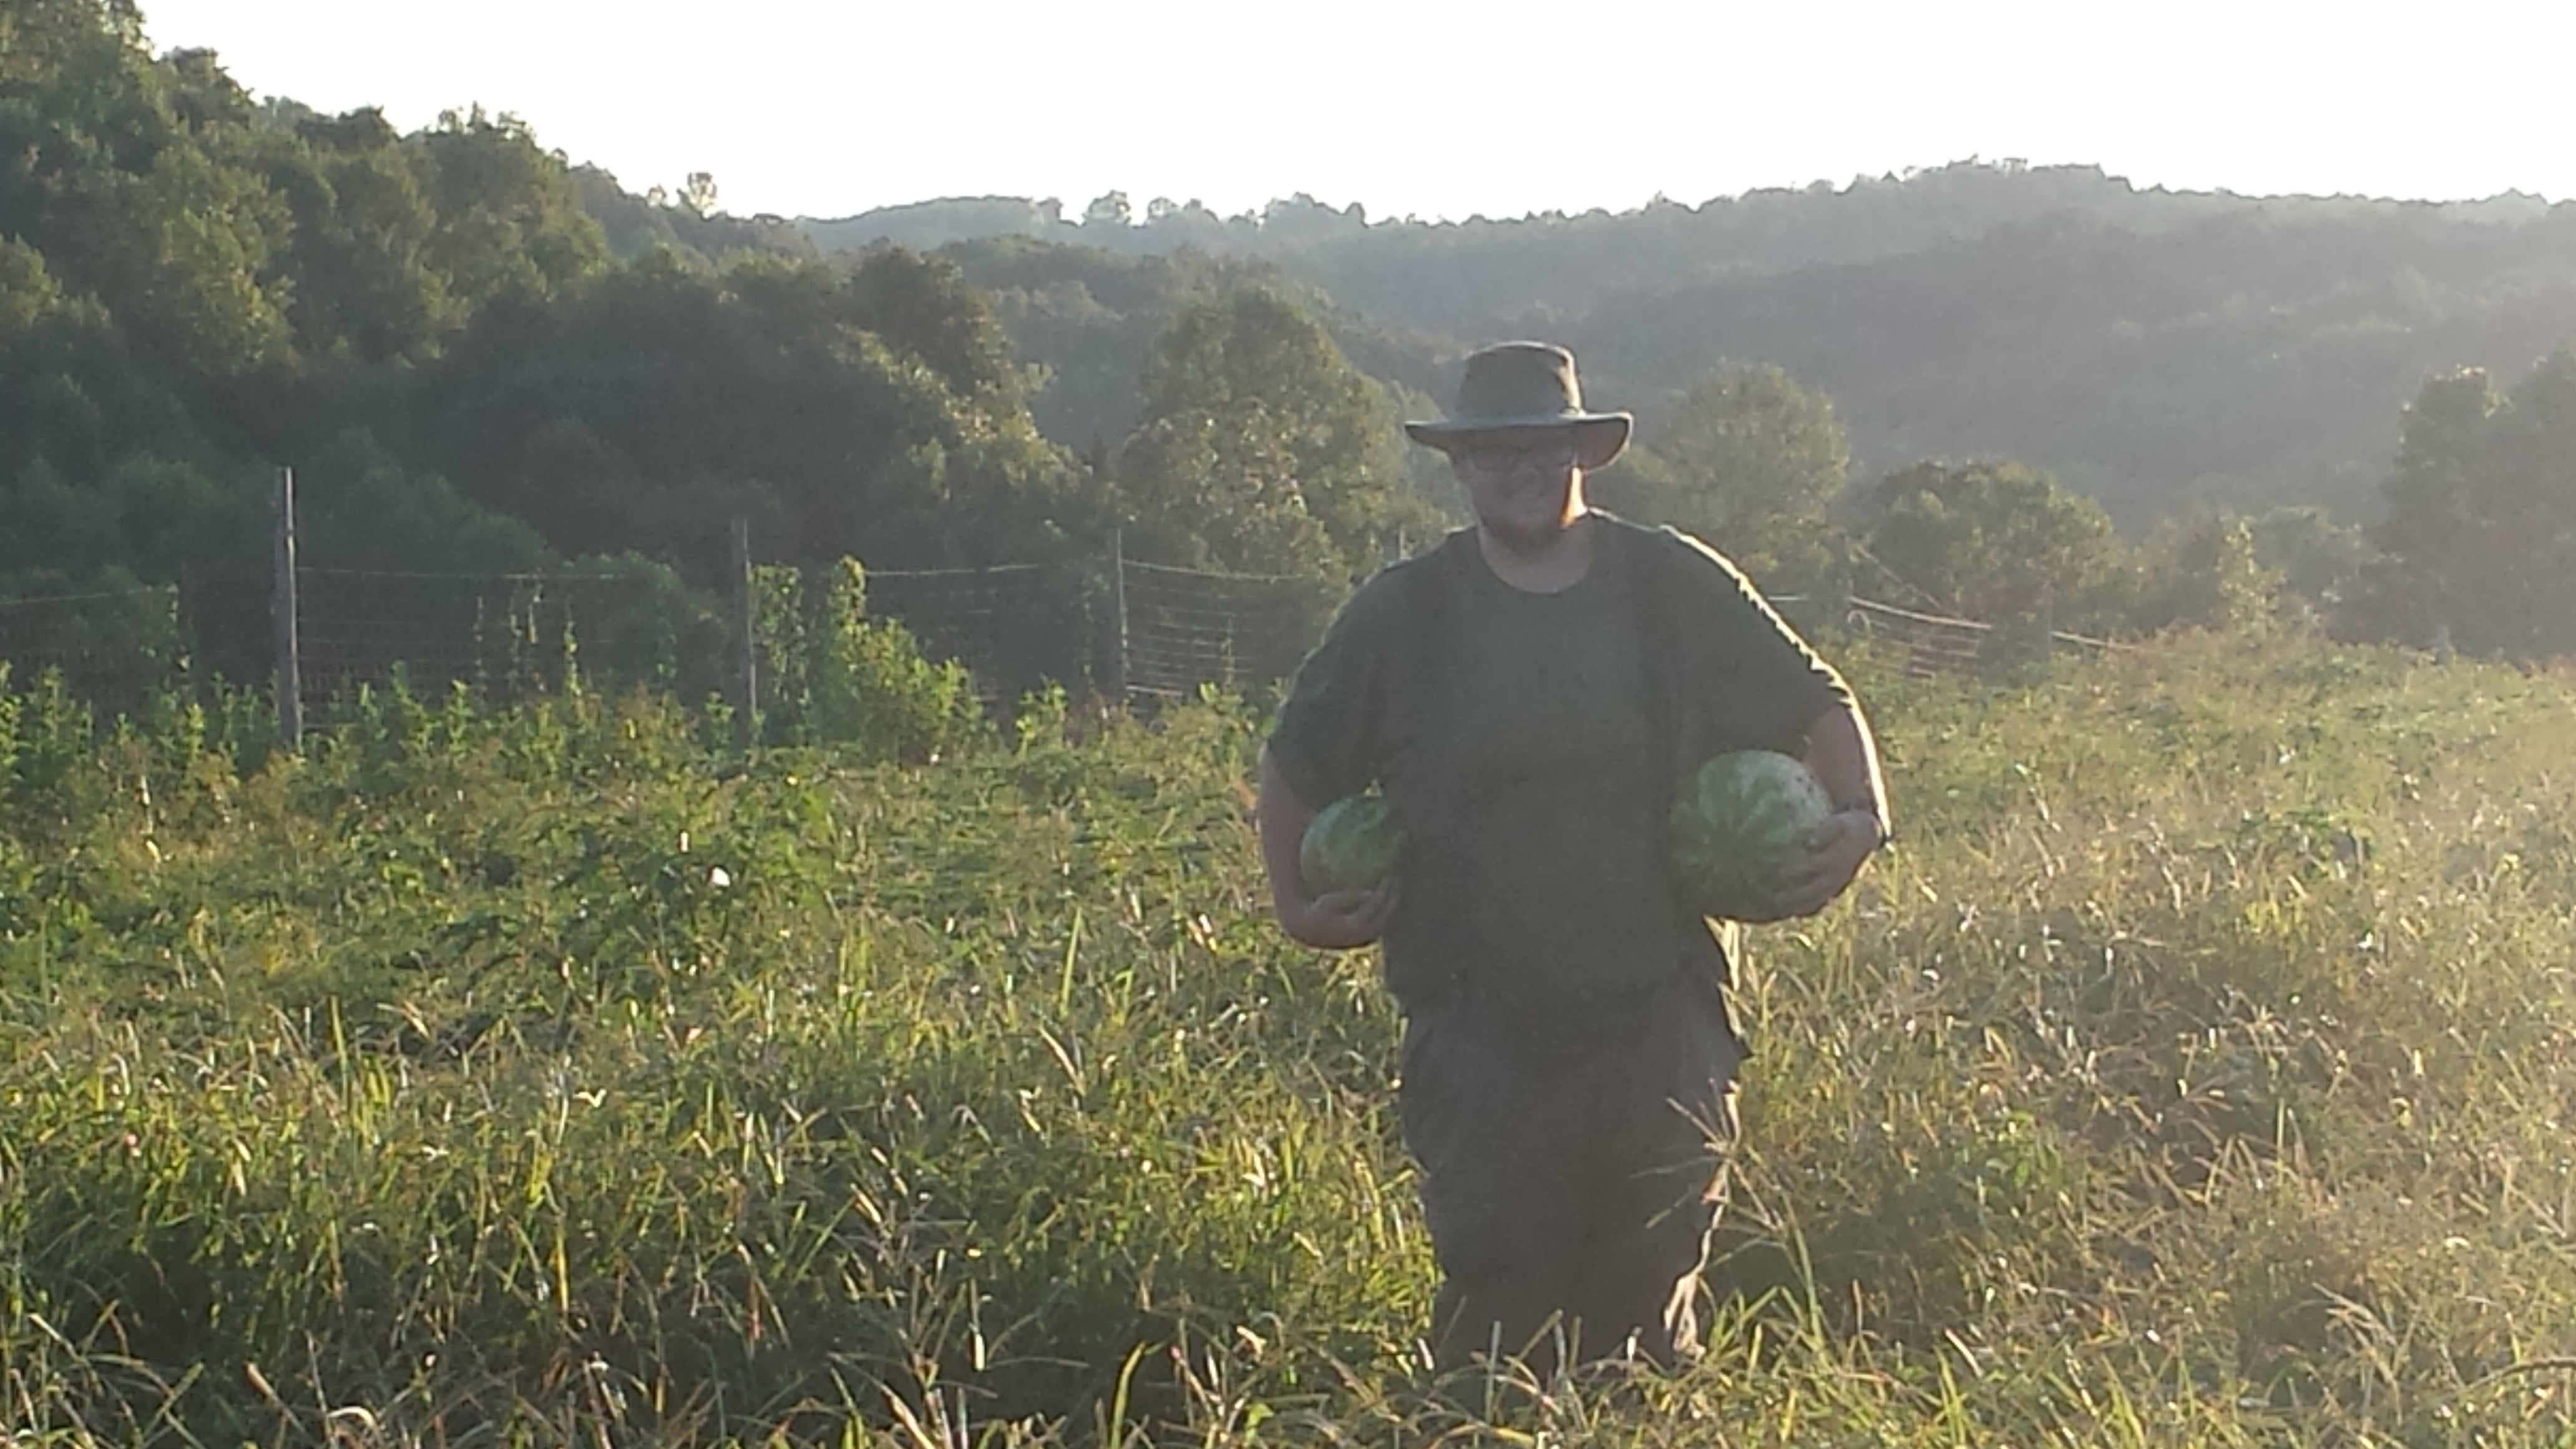 chris with watermelons in field farm